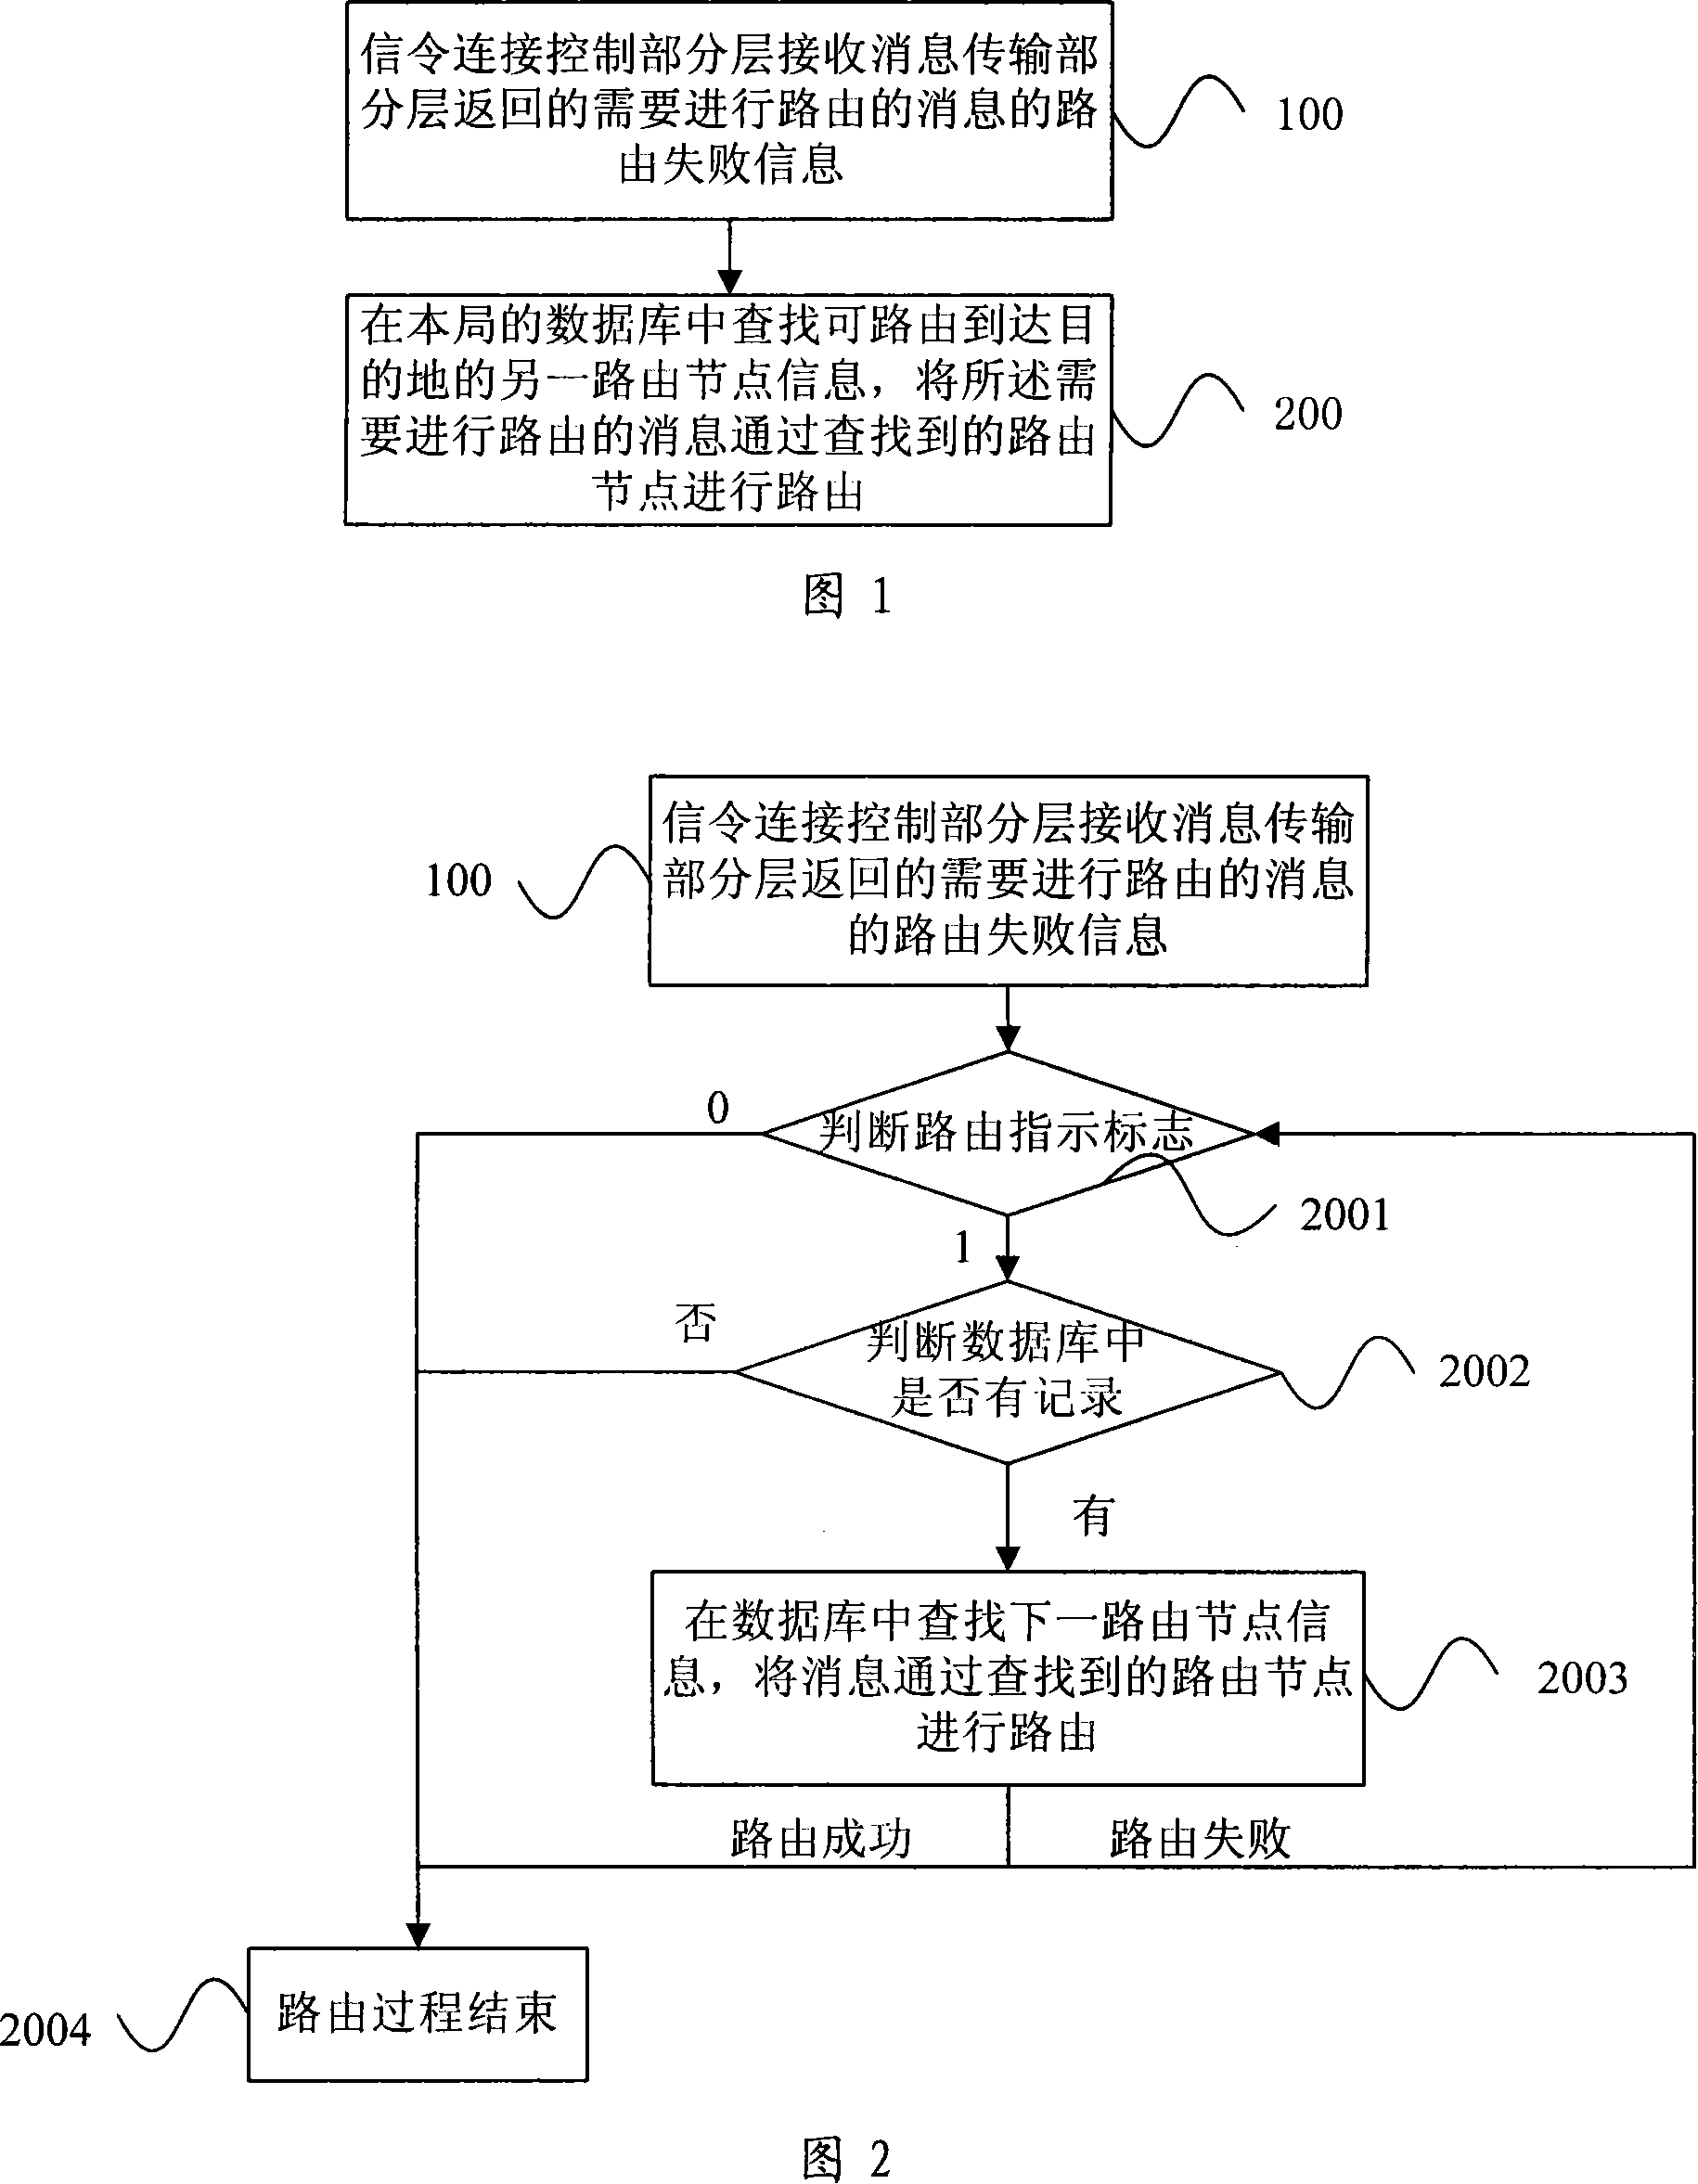 Message routing reelection method and apparatus